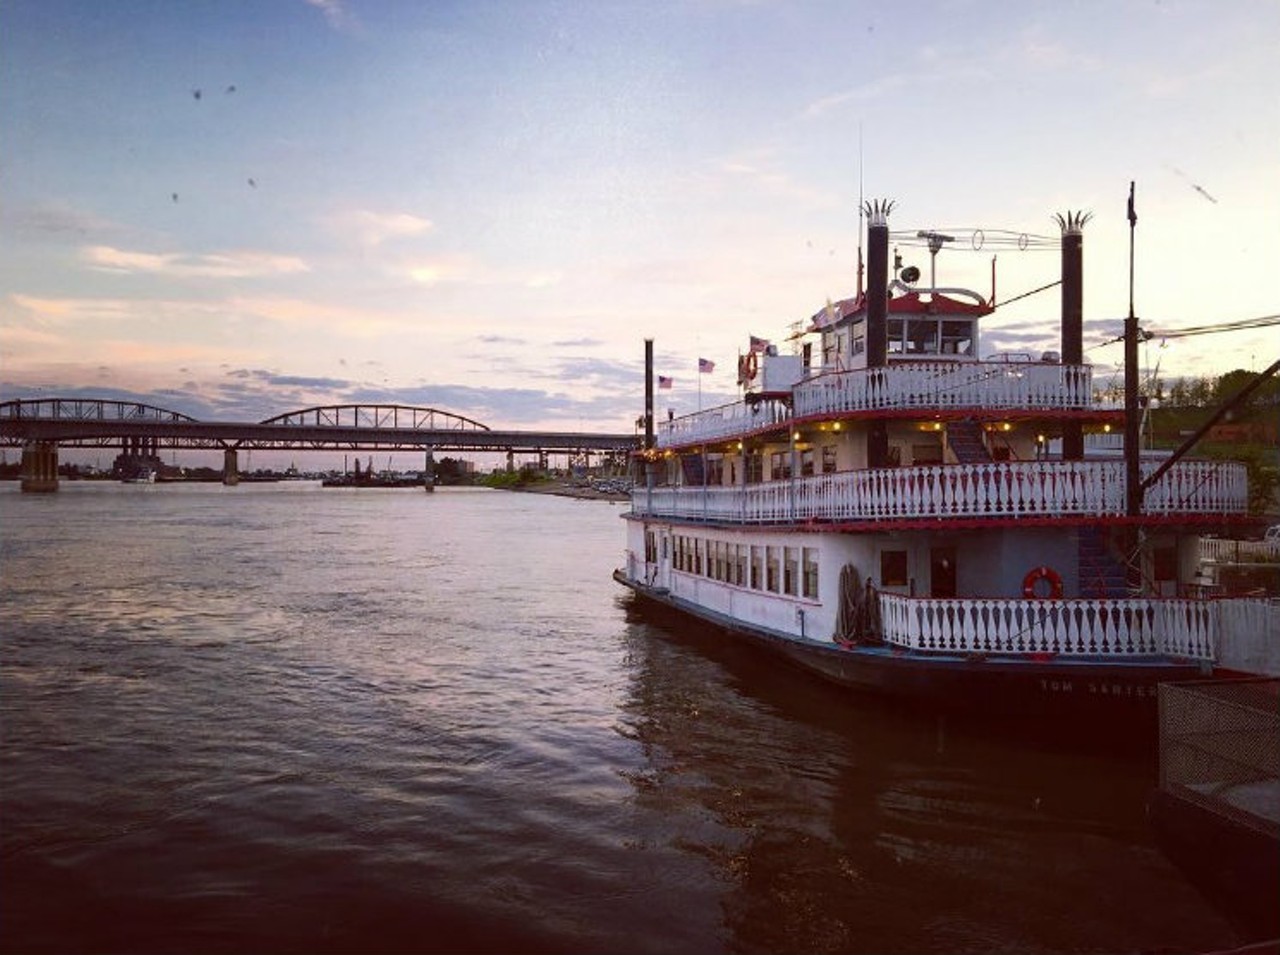 The riverboat season starts in the spring. No matter which voyage you plan to take, you&#146;re sure to see the city in a way you never have before. Photo courtesy of Instagram / luckymama_1.